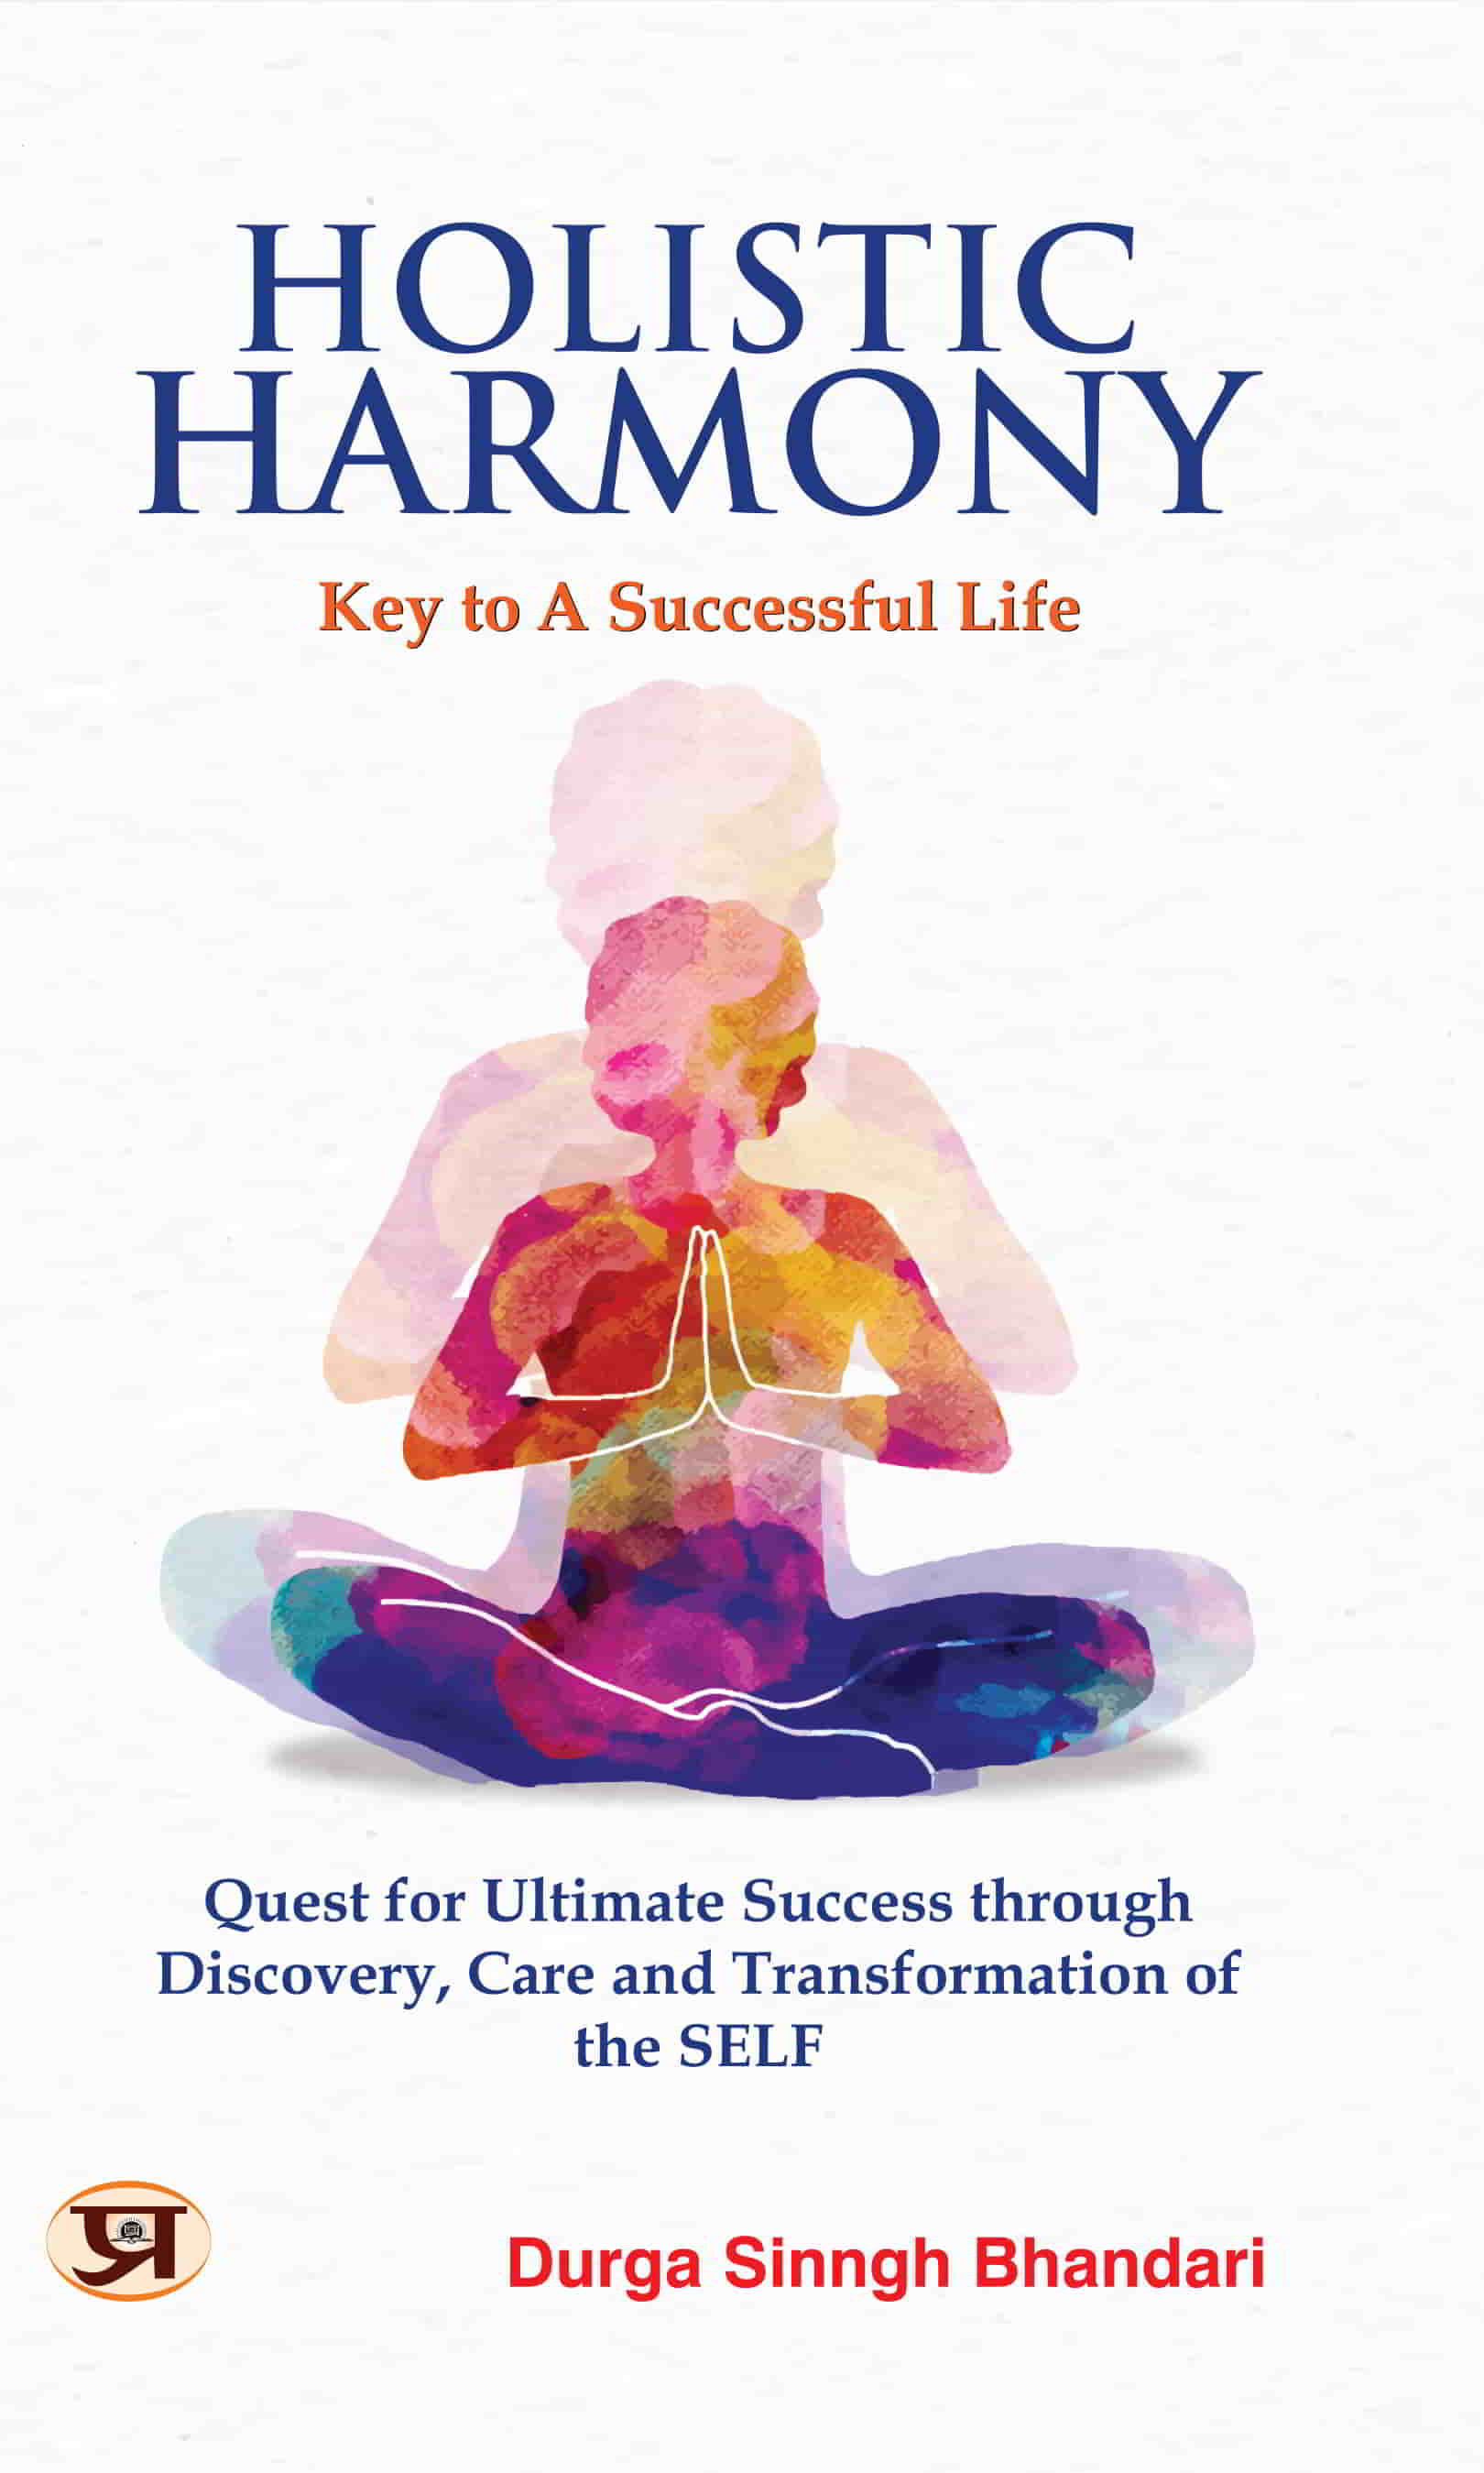 Holistic Harmony : Key To A Successful Life | Quest For Ultimate Success Through Discovery, Care And Transformation of The Self